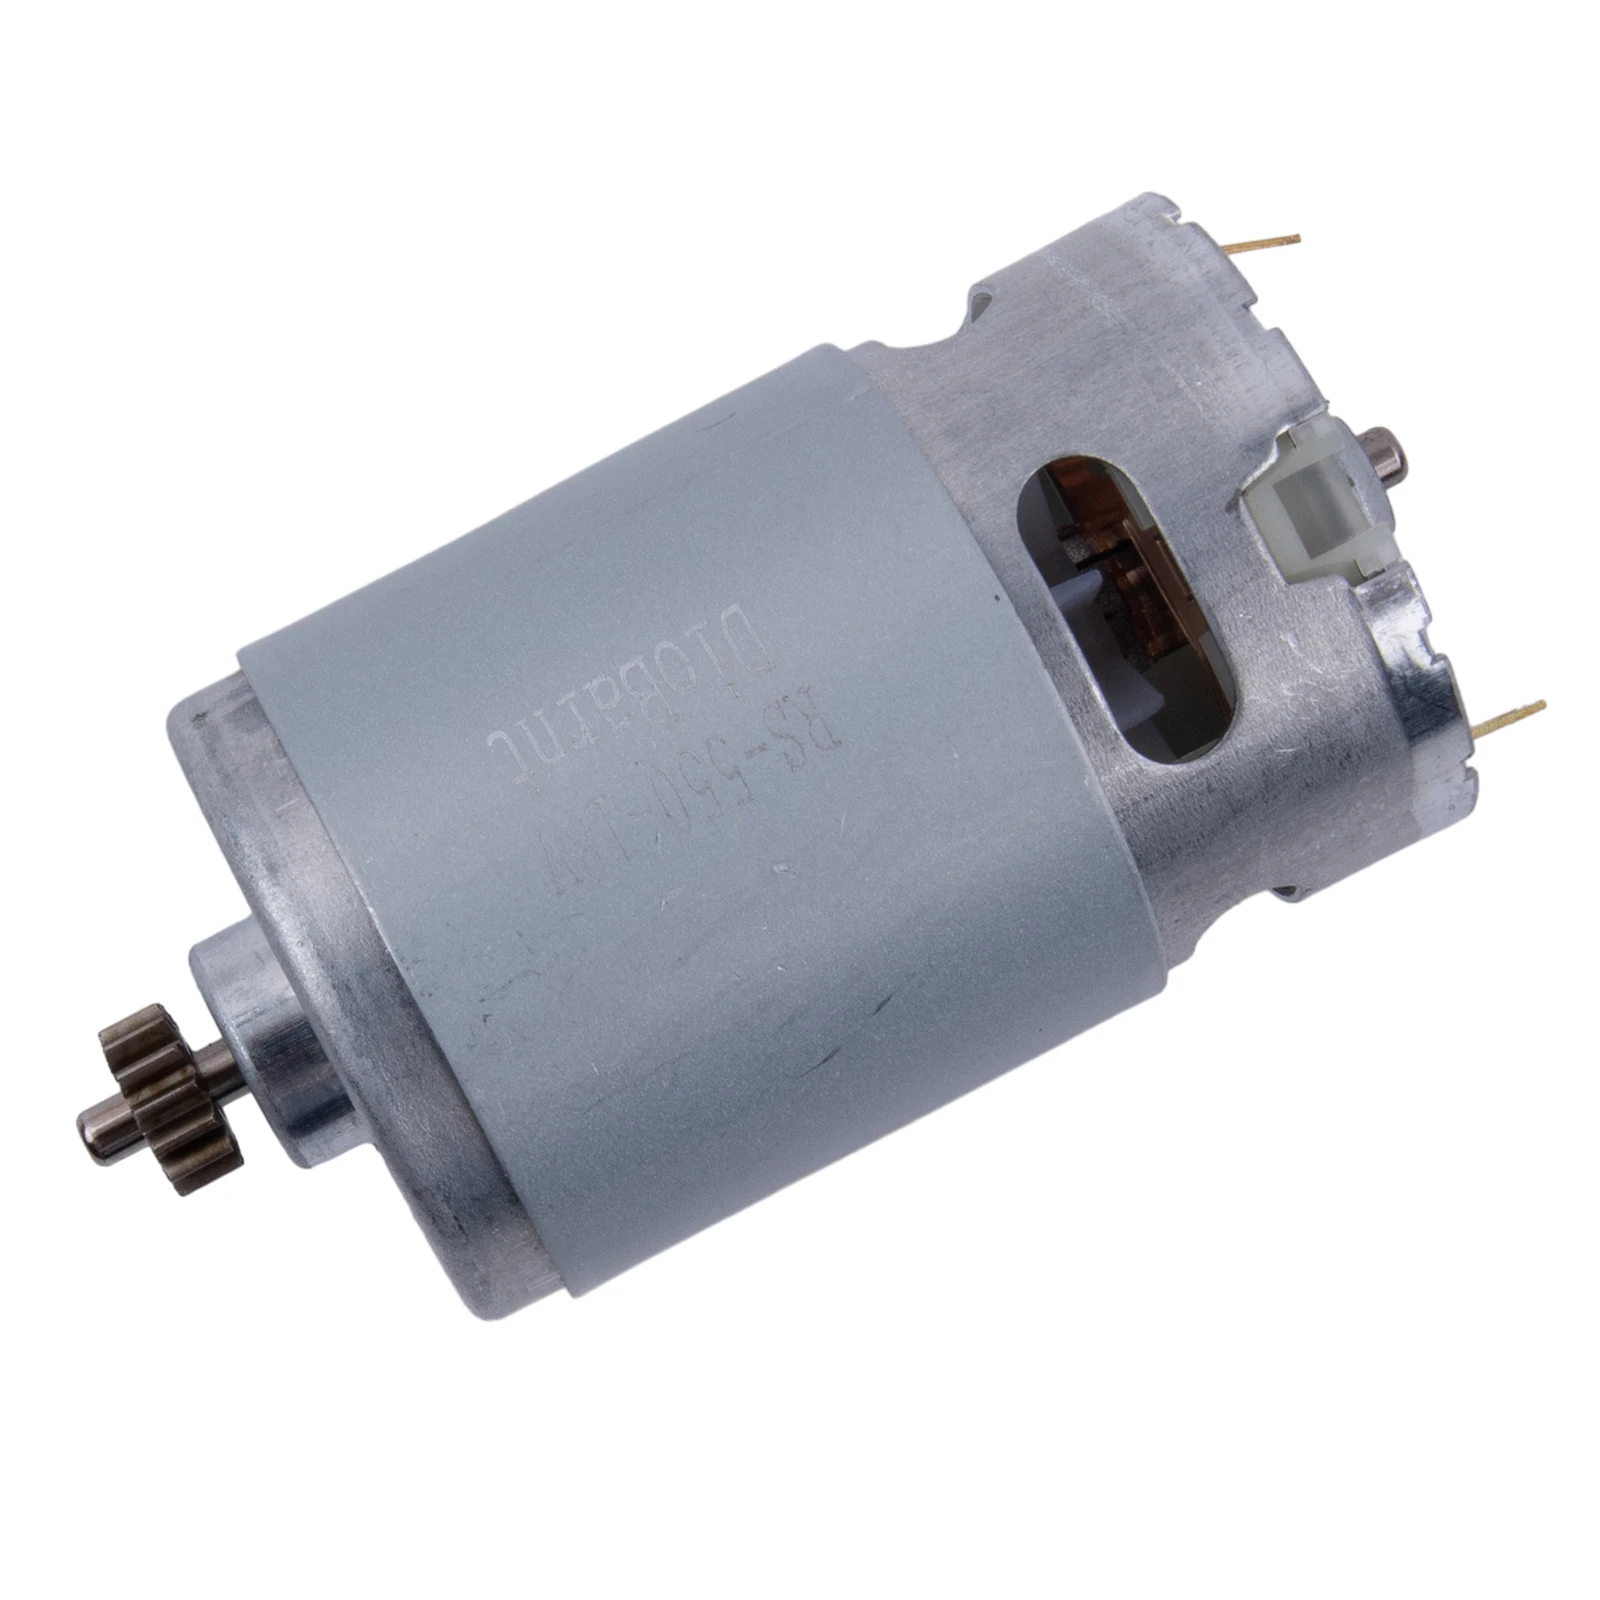 Long Lasting Silver 317004430 DC Motor for Metabo BS18 Electric Cordless Impact Drill High Quality and Reliable warehouse greenhouse wall thermometer hang accurate garden high impact styrene kerosene filled mounted reliable